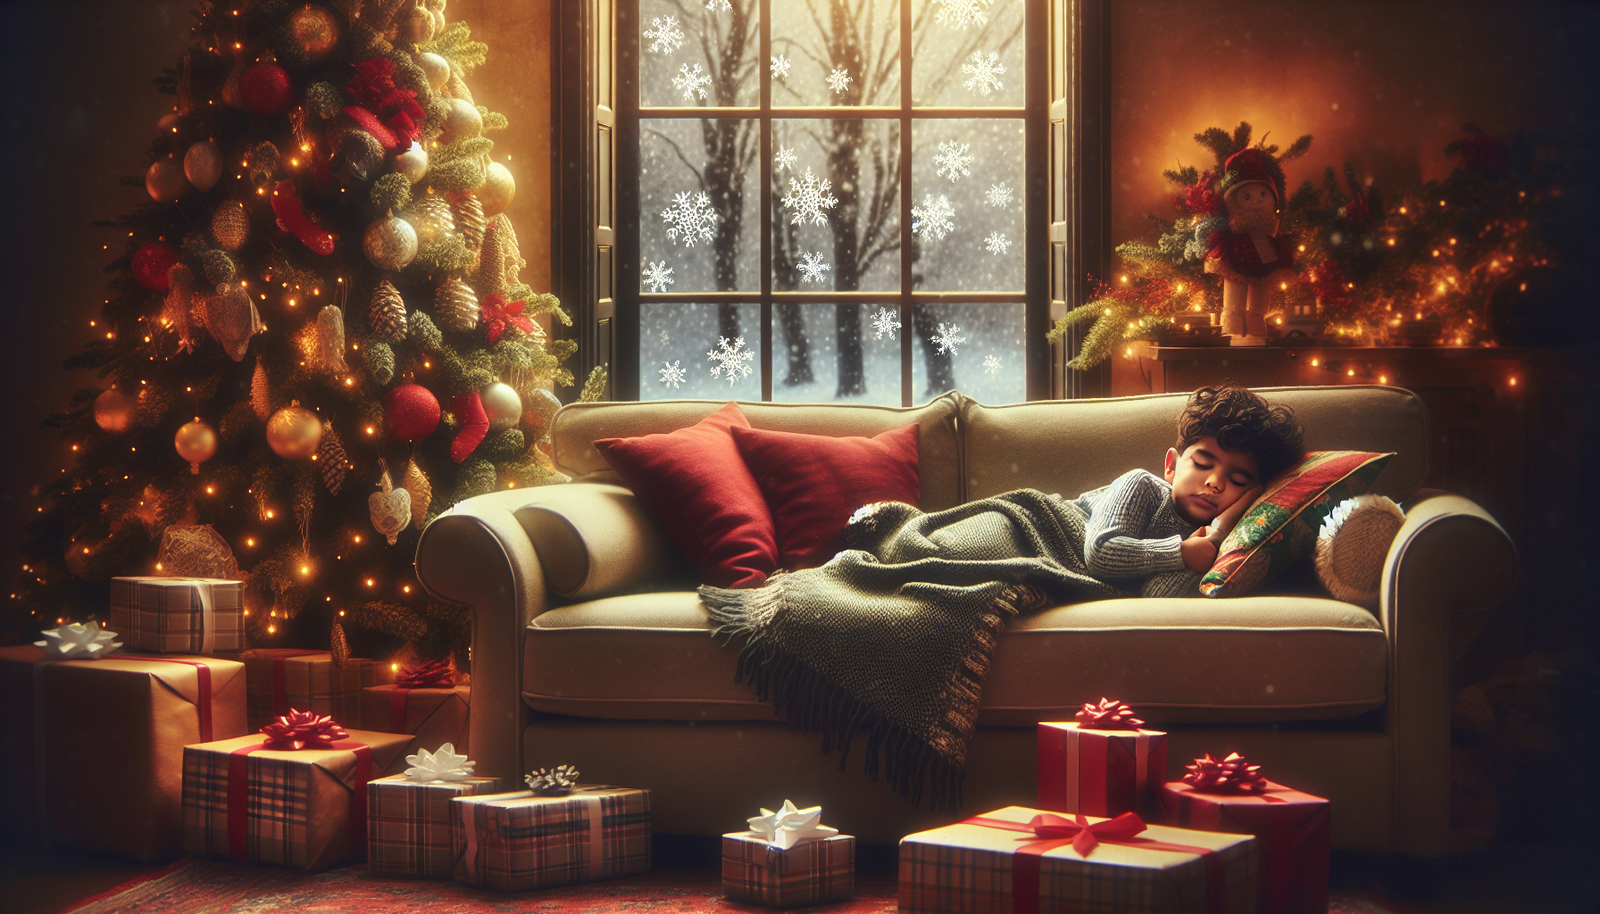 A harmonious scene of a child sleeping in a sofa next to a beautifully decorated Christmas tree.